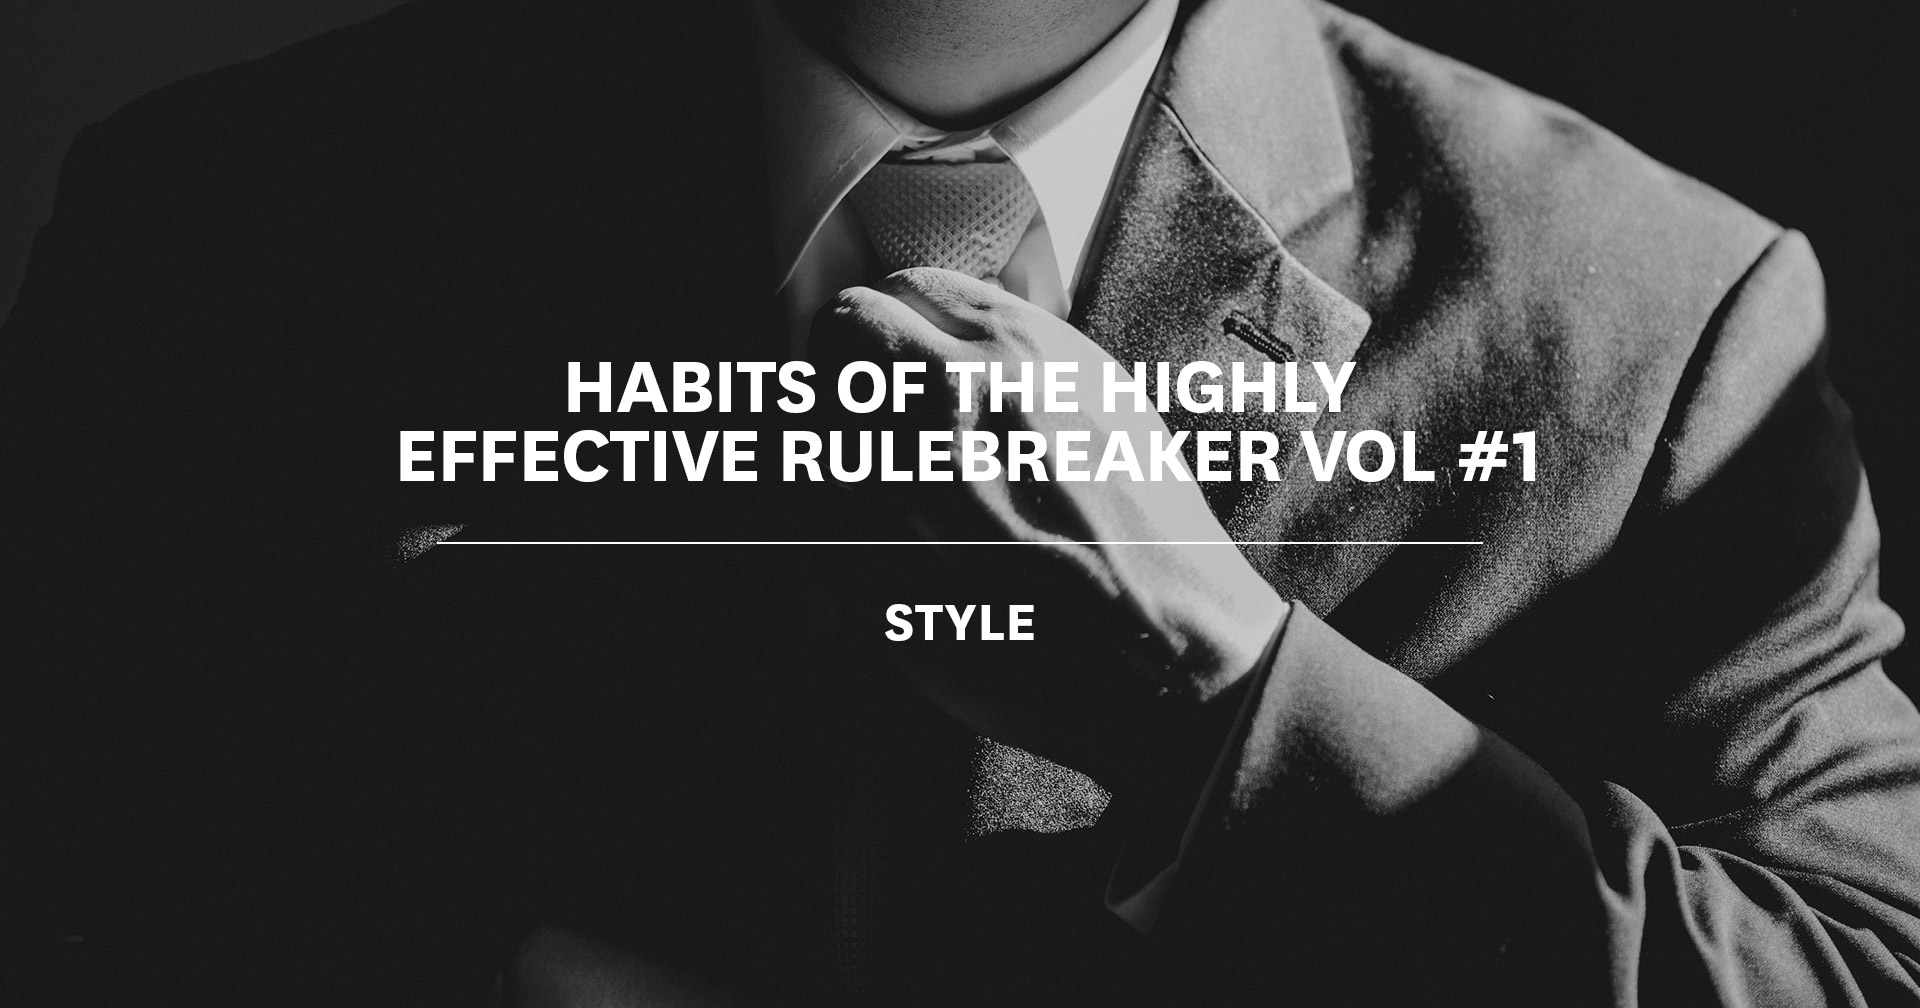 The Habits of the Highly Effective Rulebreaker Vol #1: Style